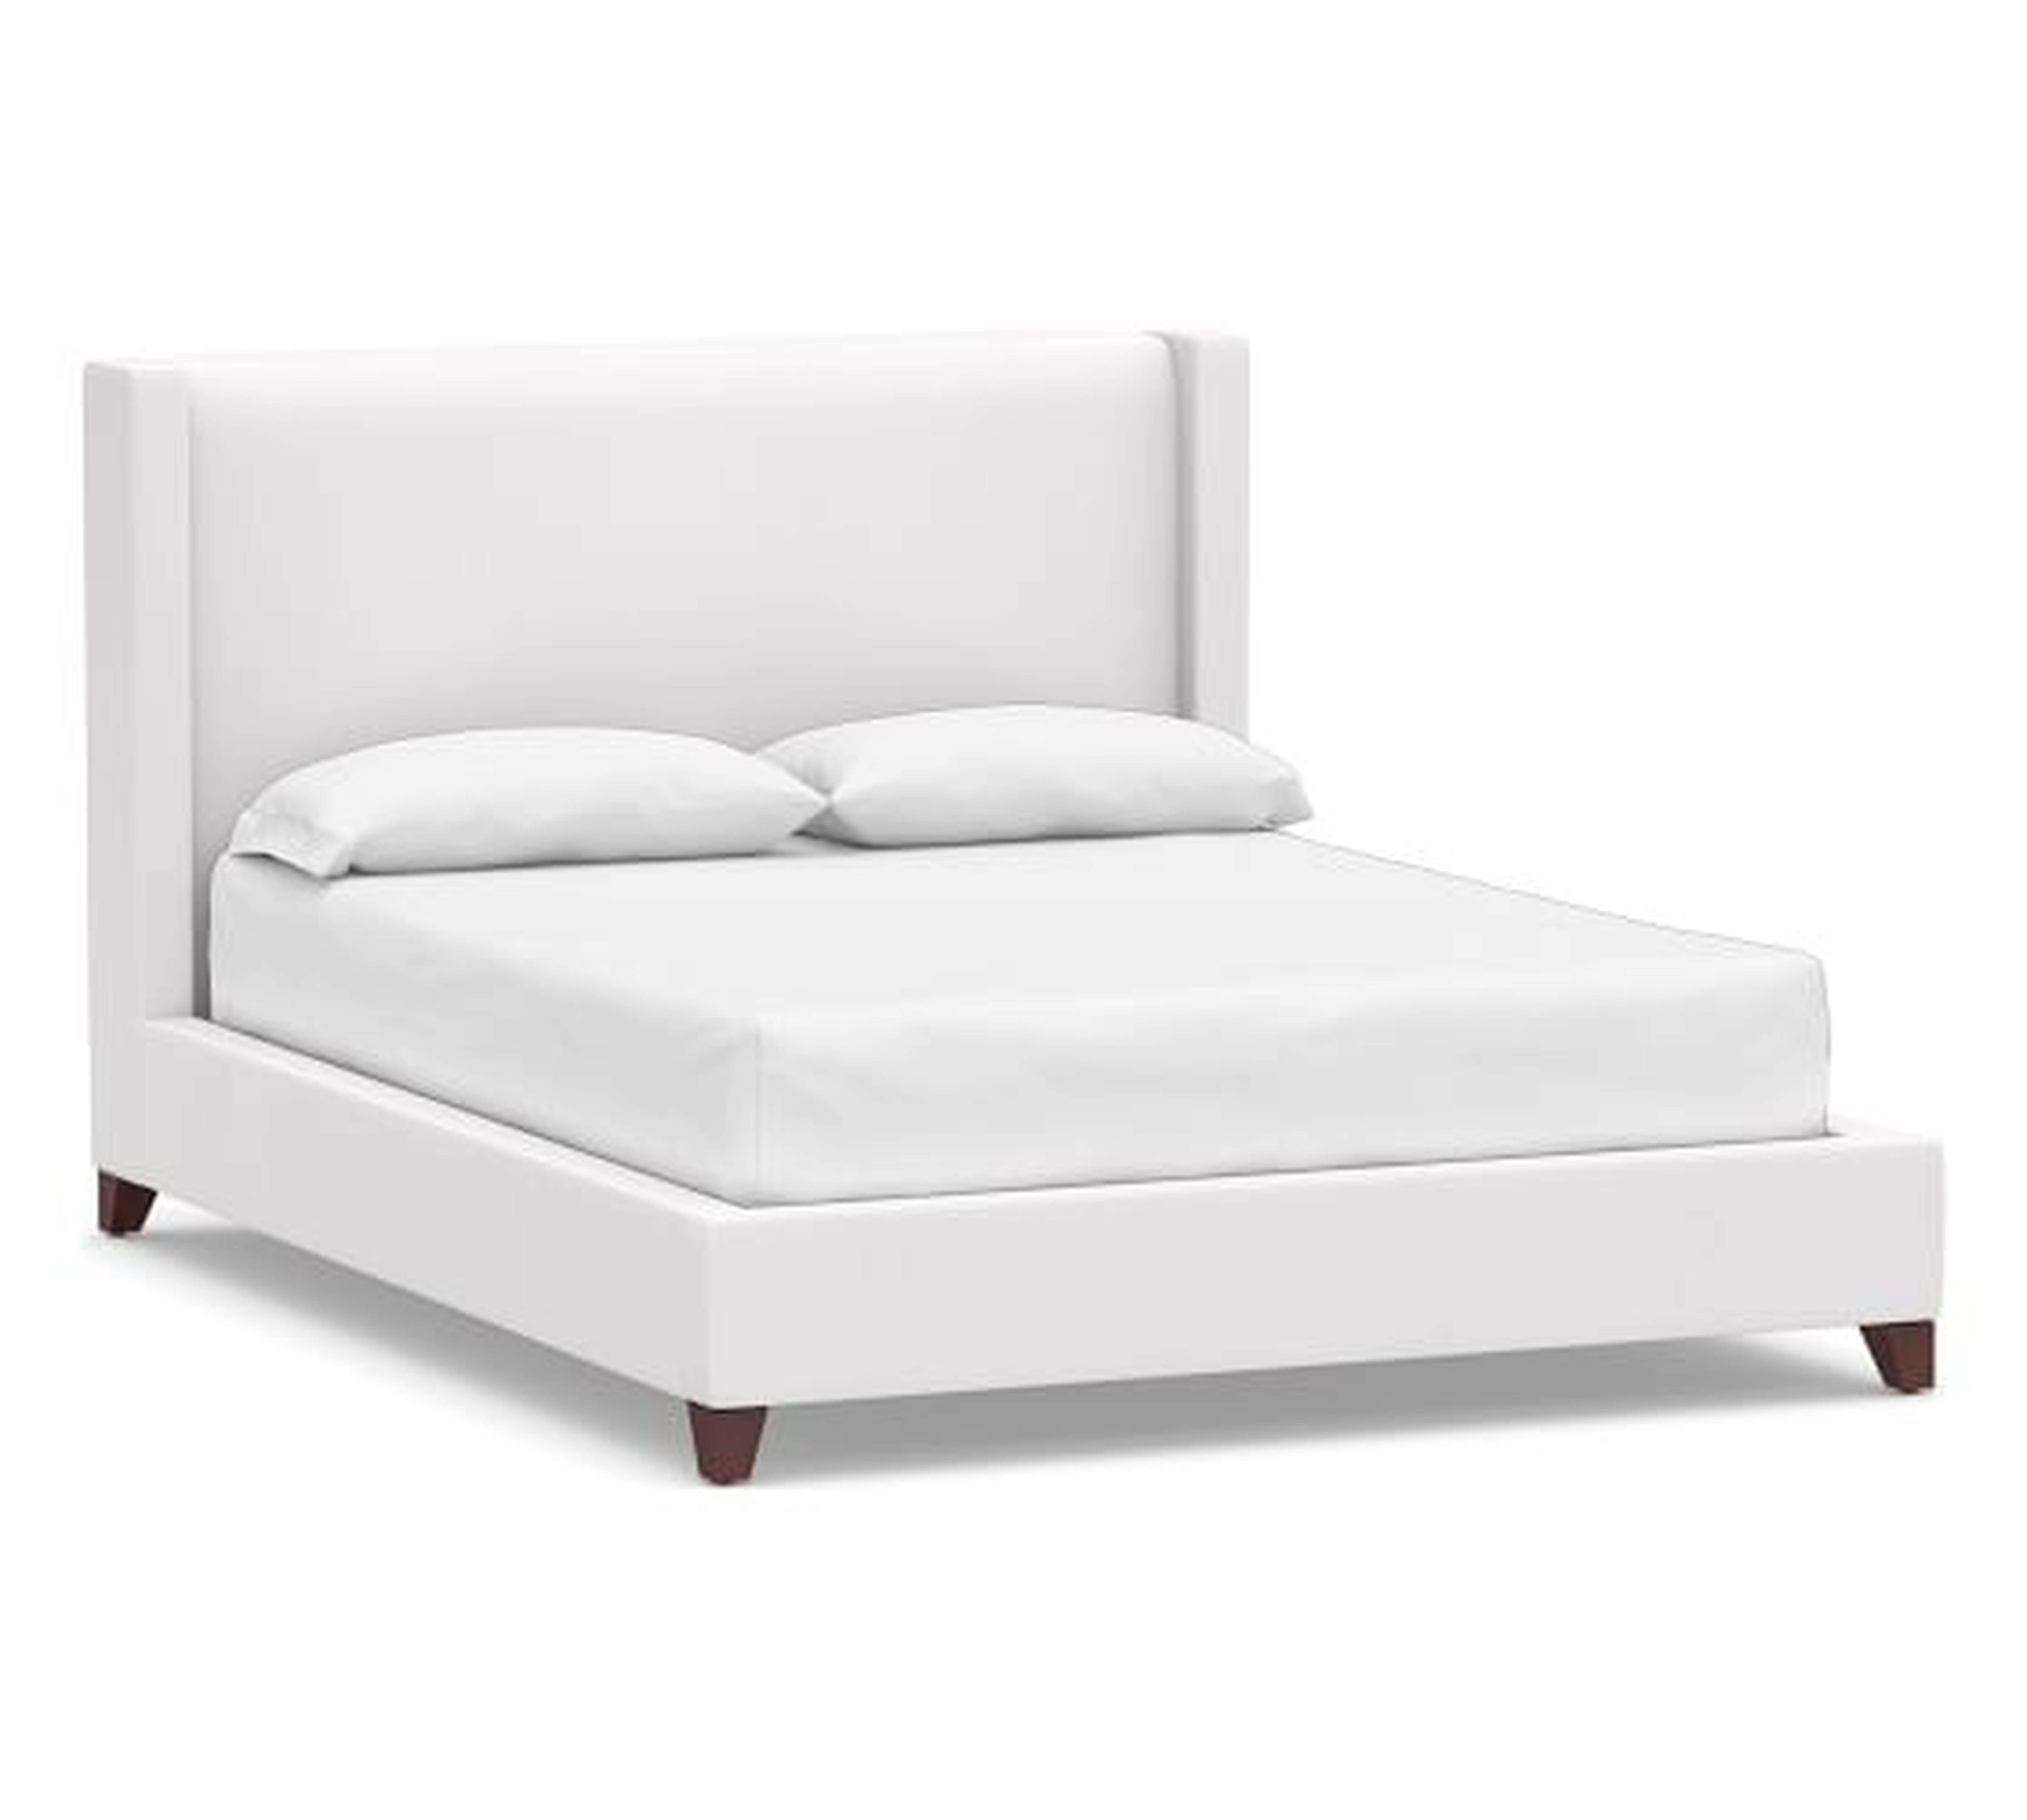 Harper Upholstered Non-Tufted Low Bed without Nailheads, Queen, Twill White - Pottery Barn